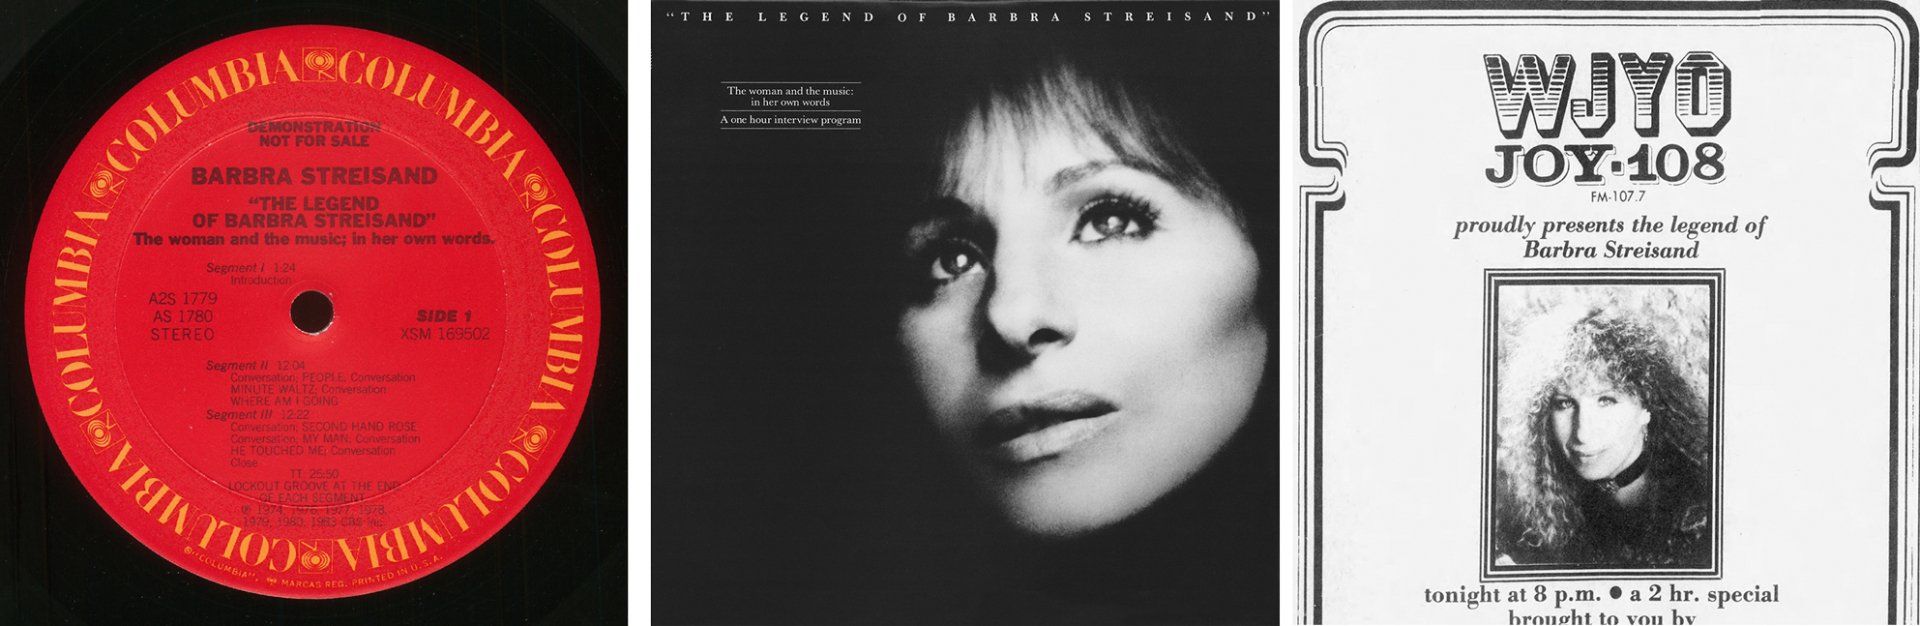 Label and front cover of Legend of Barbra Streisand radio show.